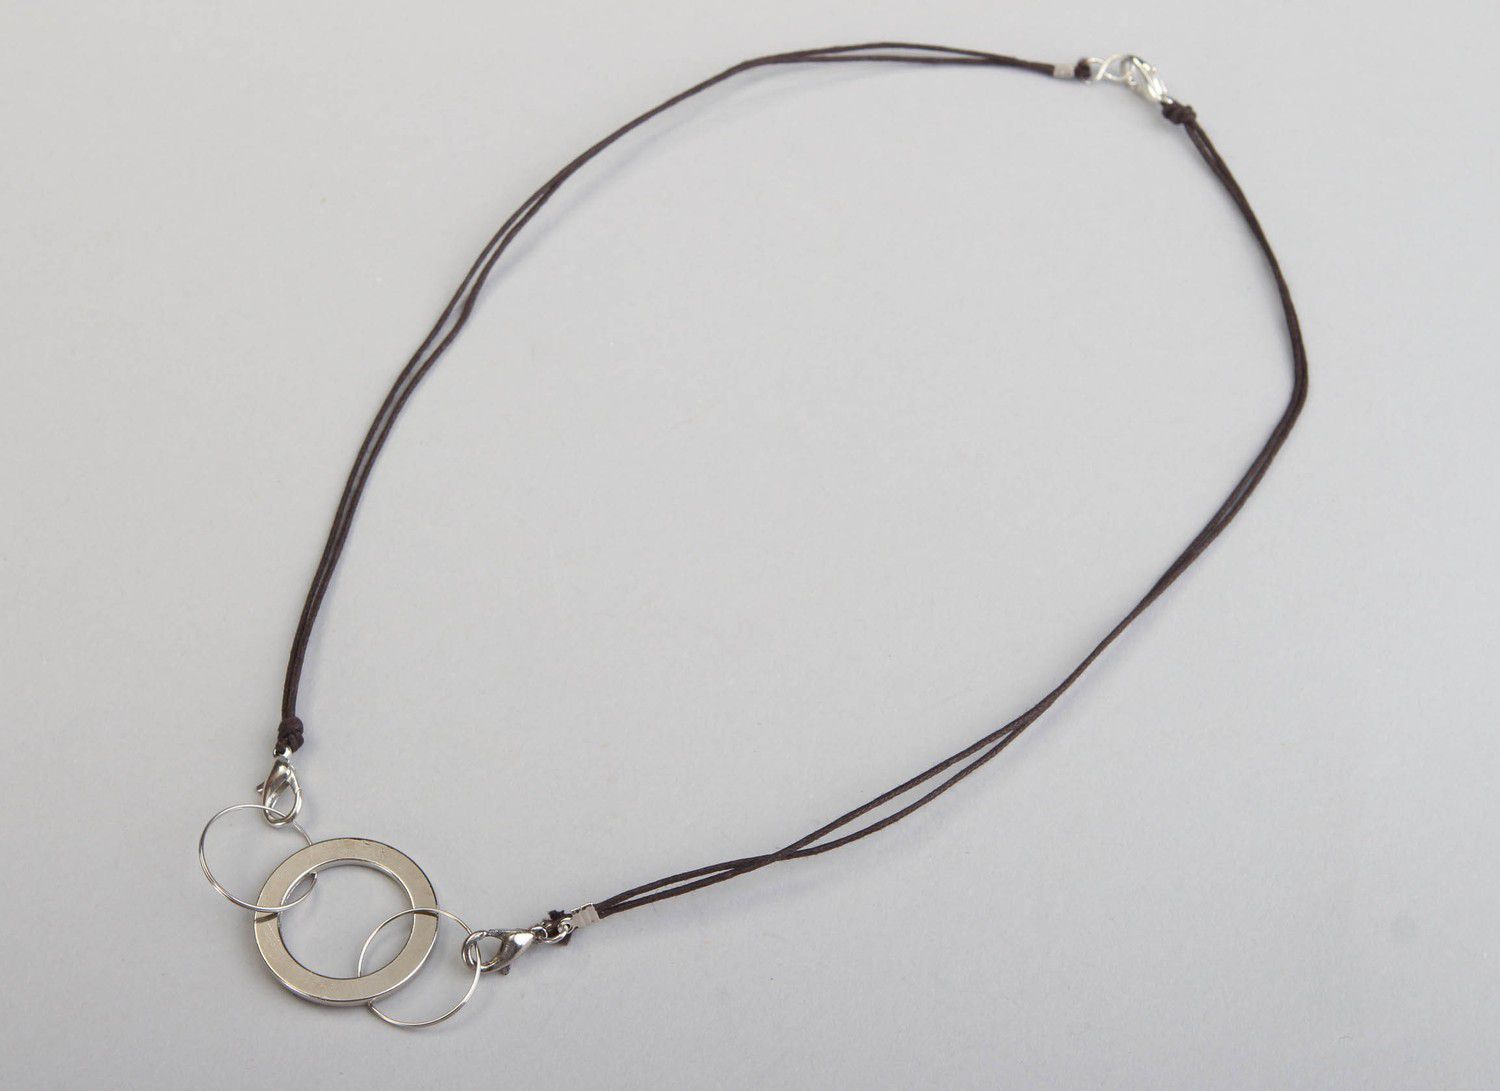 Necklace with metal element, handmade photo 2